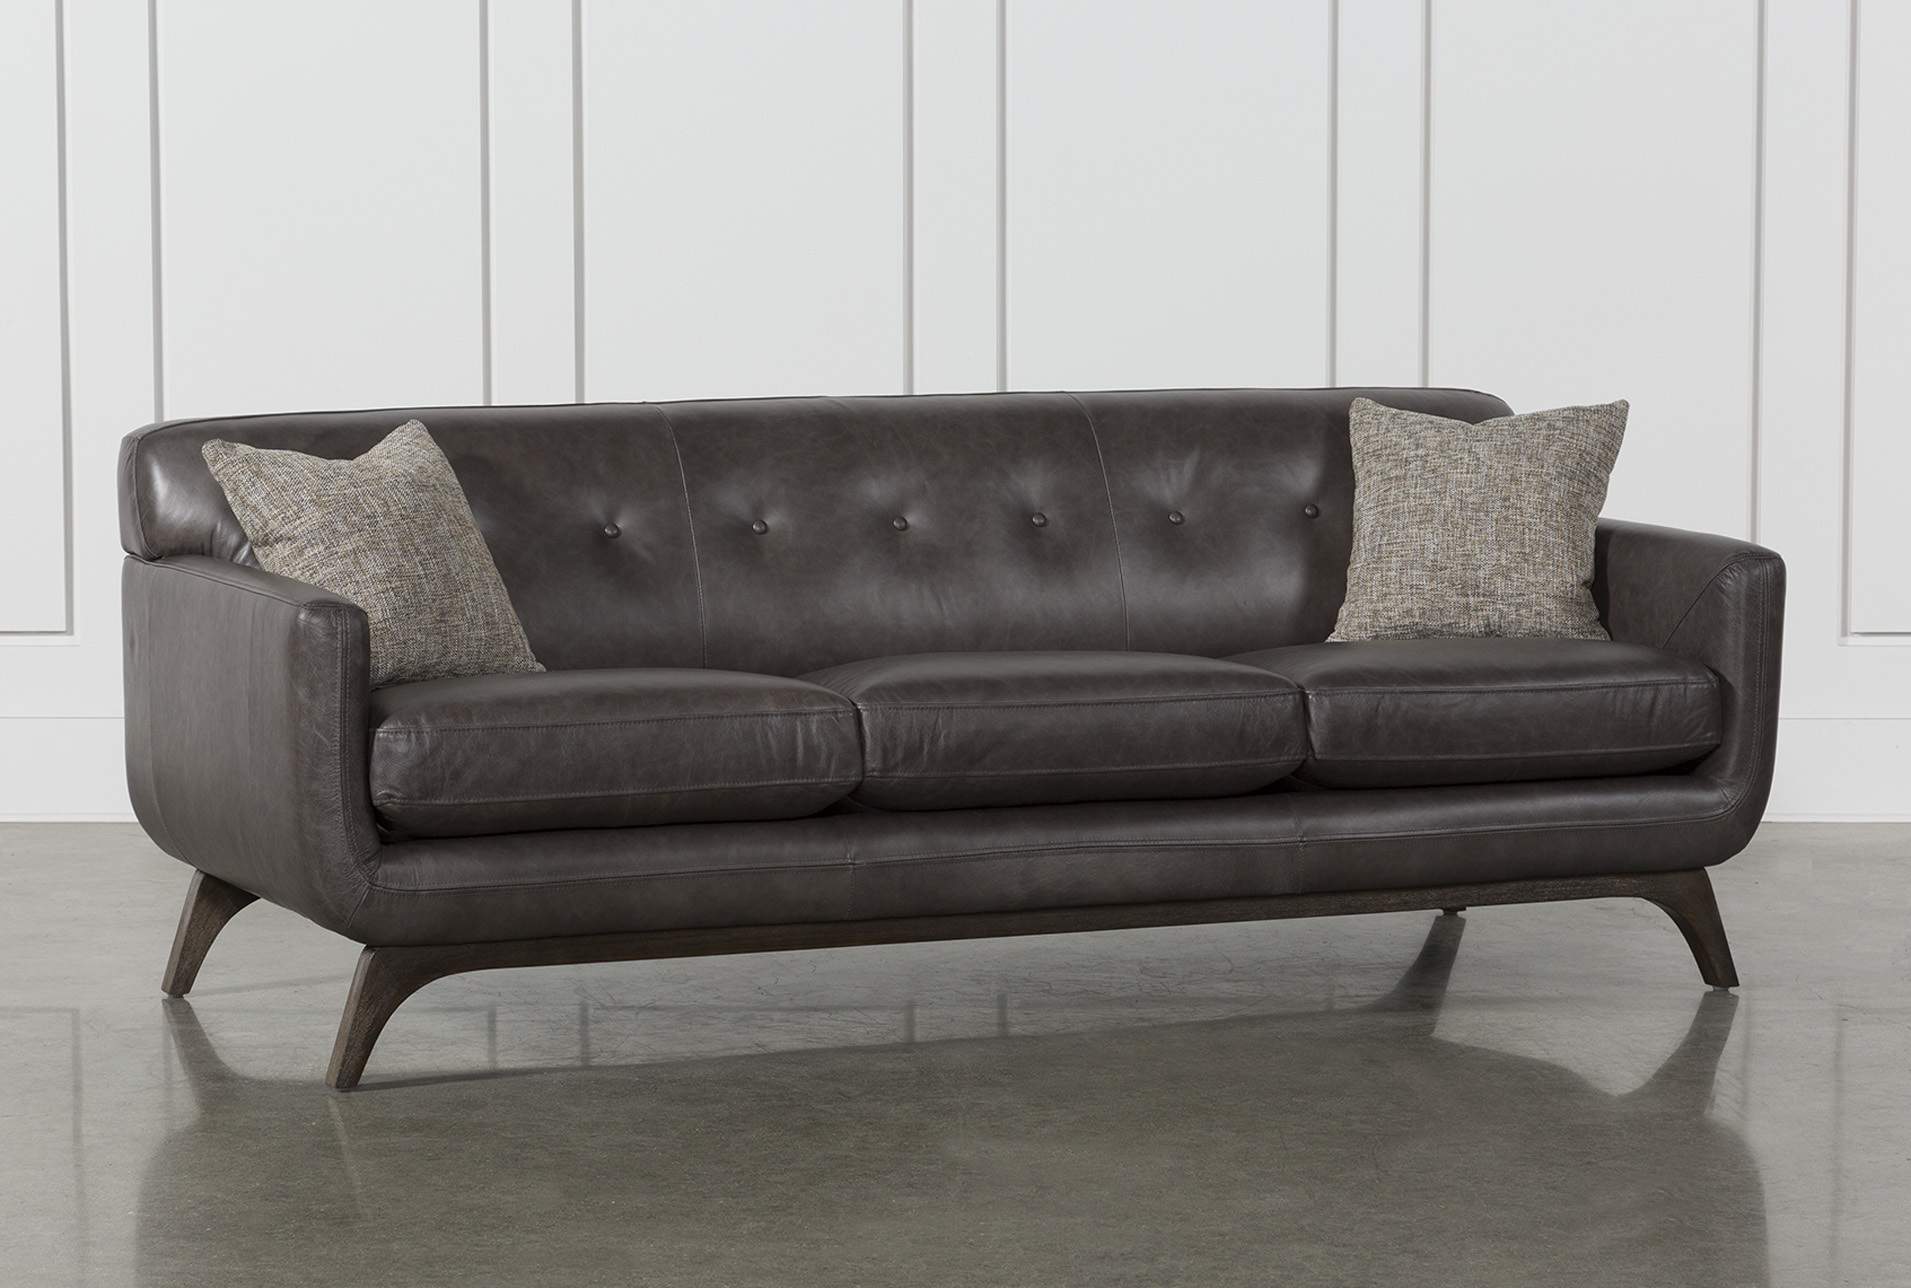 Leather Sofas Remain a Top Choice of
Modern Man